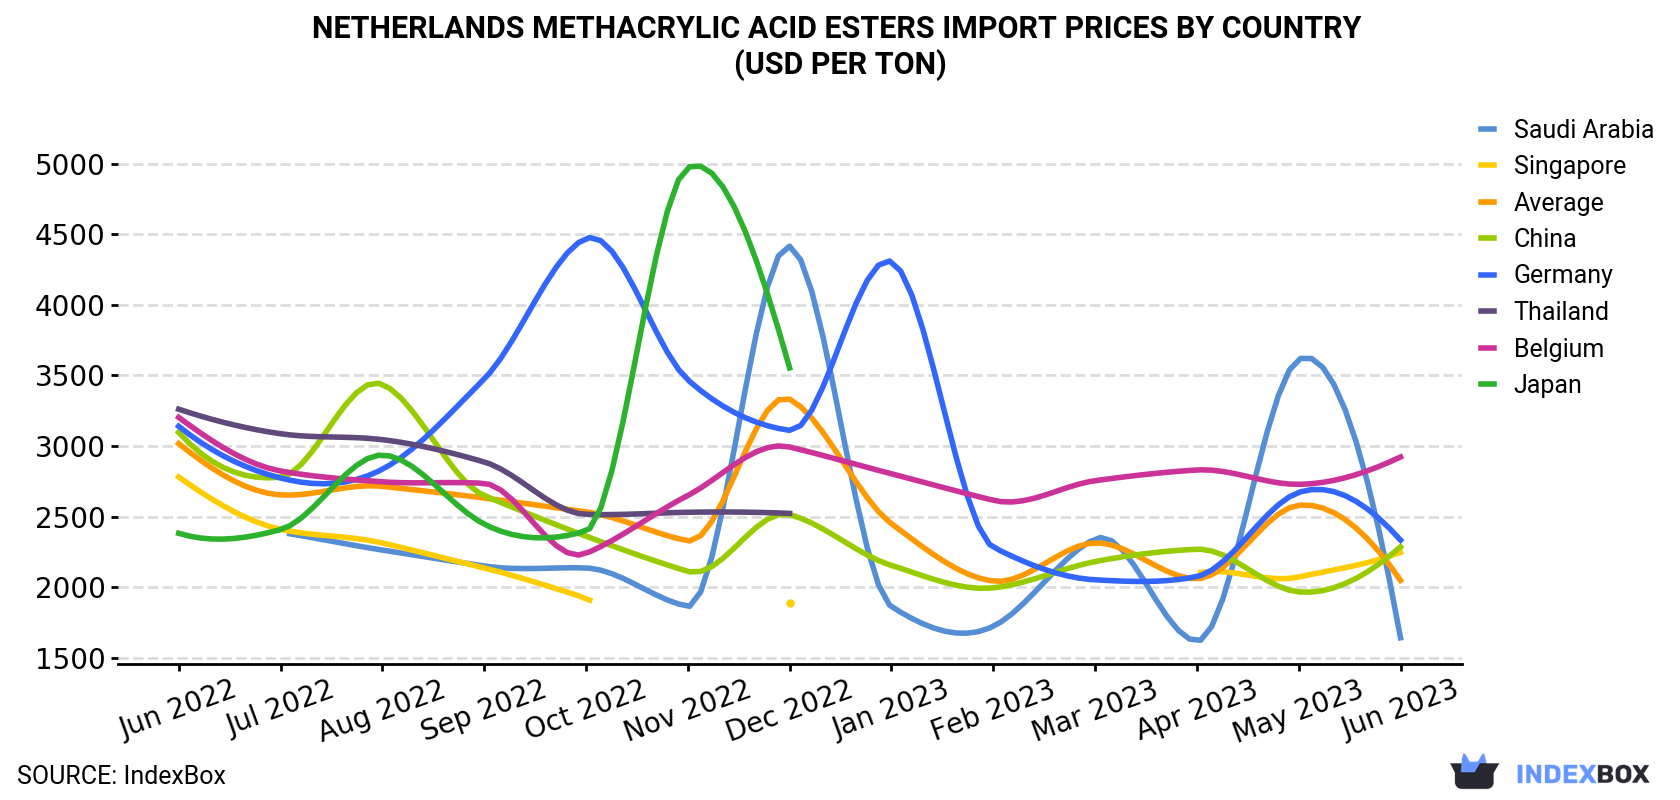 Netherlands Methacrylic Acid Esters Import Prices By Country (USD Per Ton)